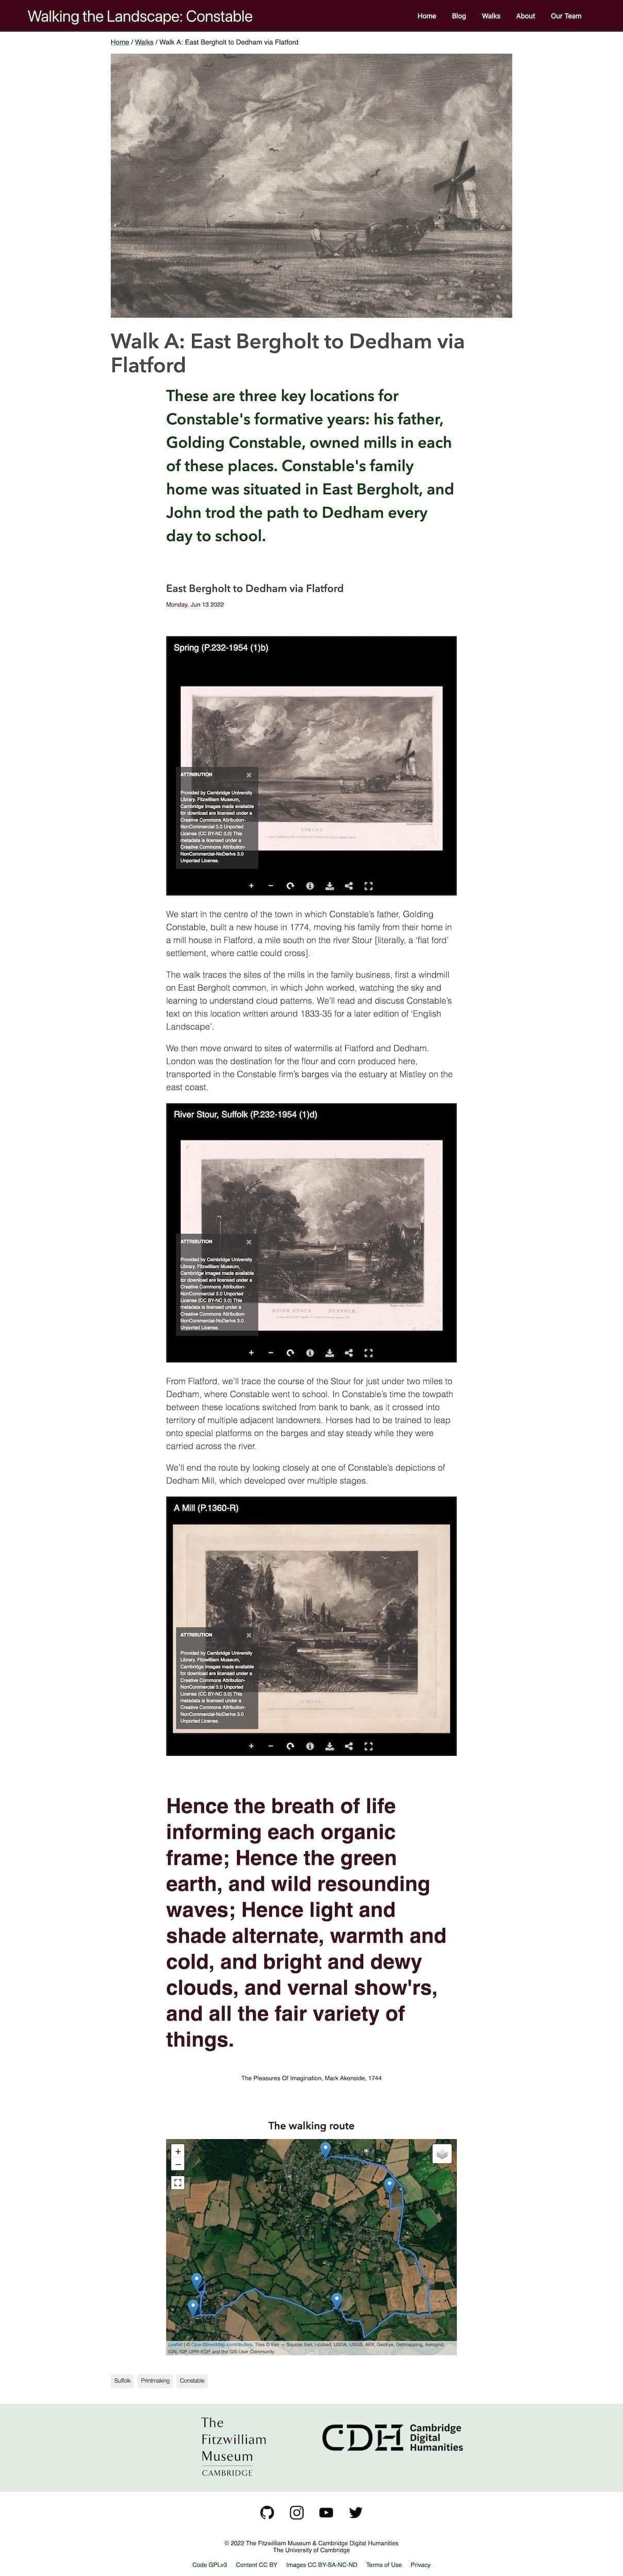 A screenshot of the website and a blog post